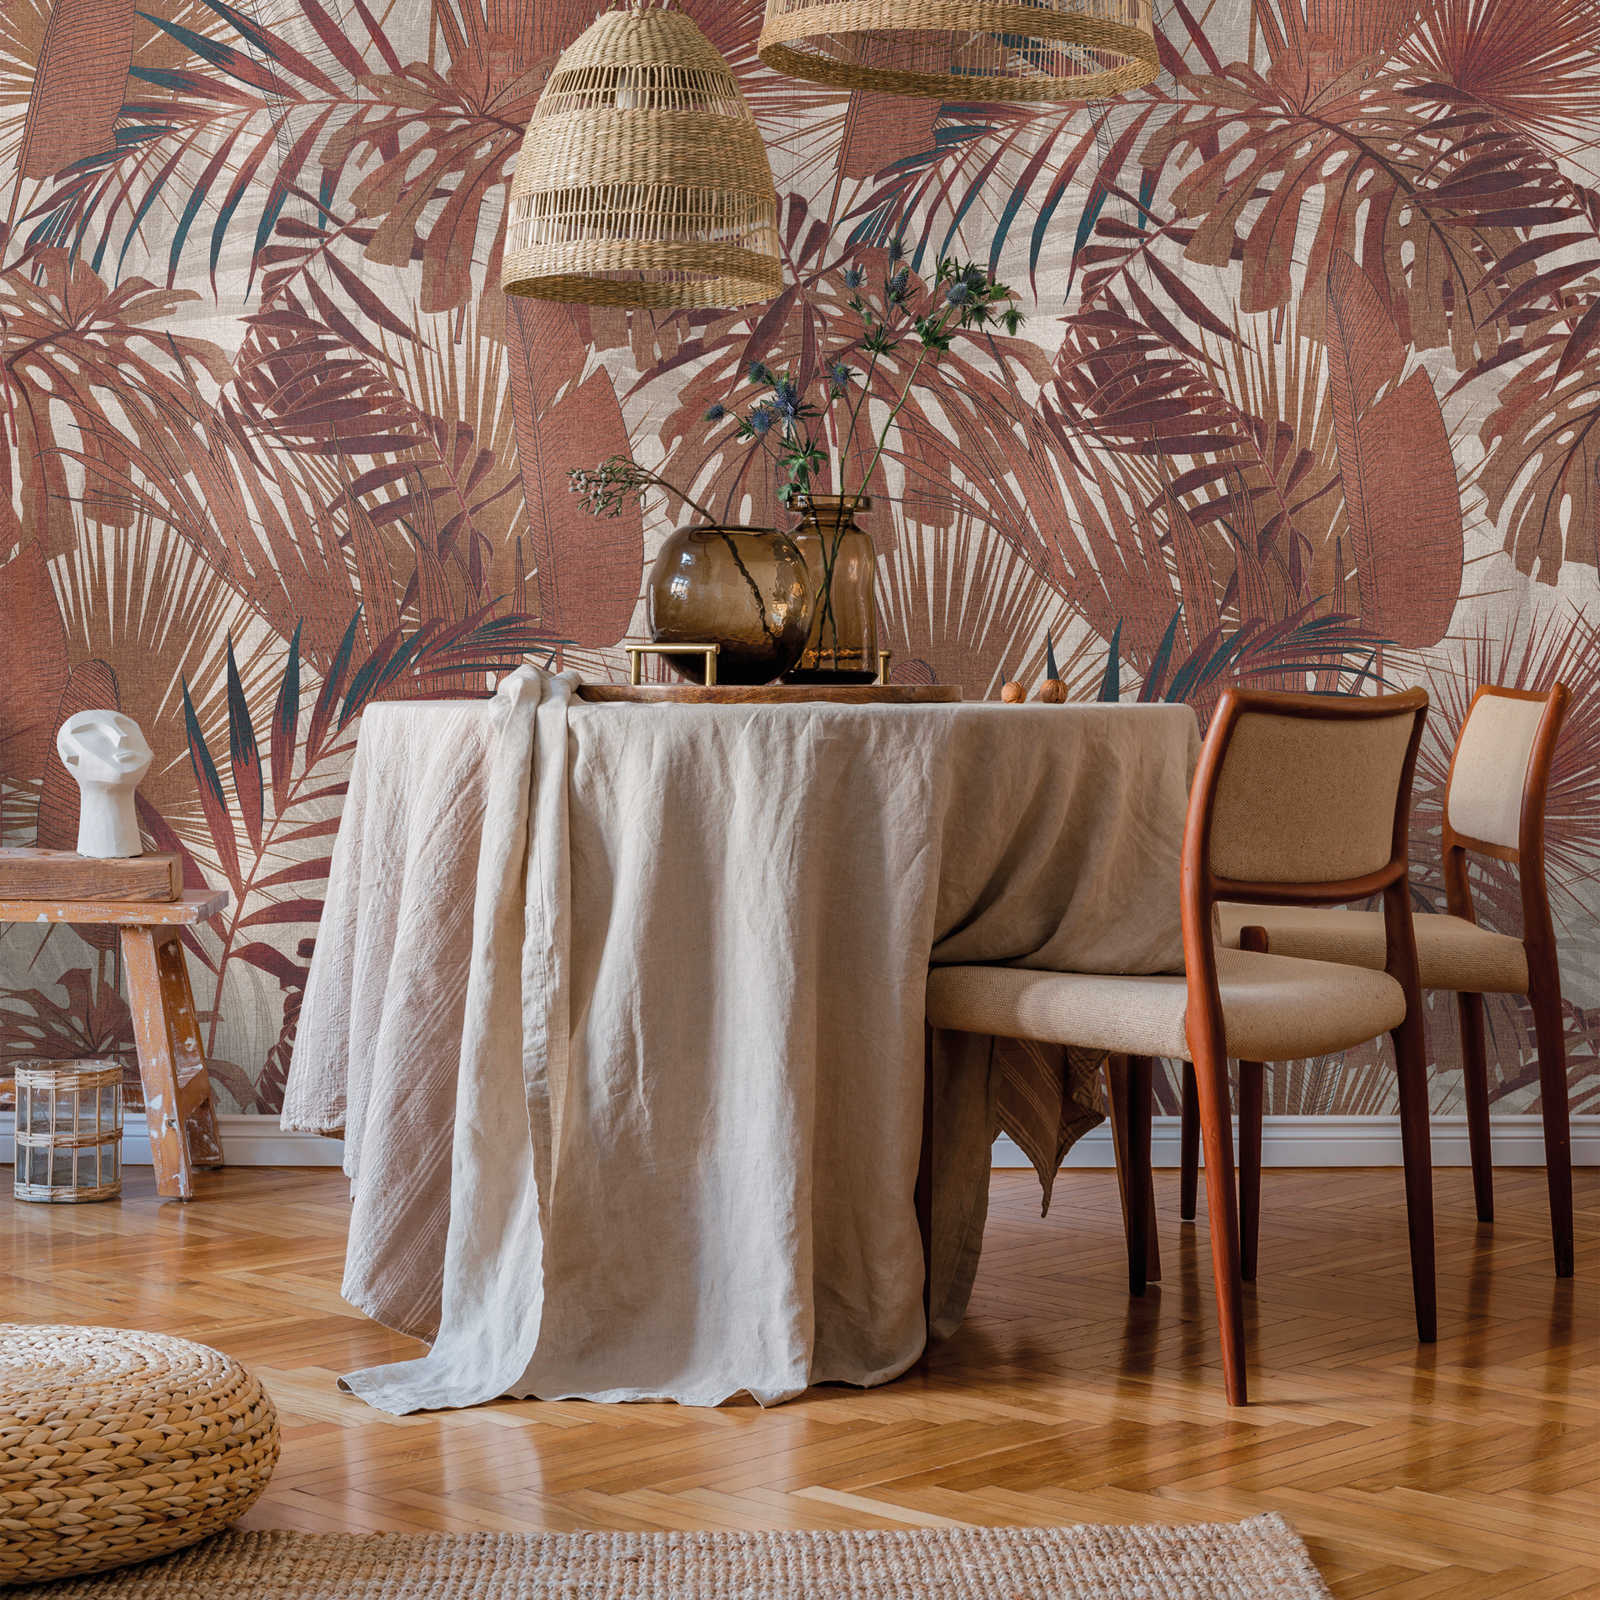 Non-woven wallpaper with jungle leaves motif - reddish brown, beige
